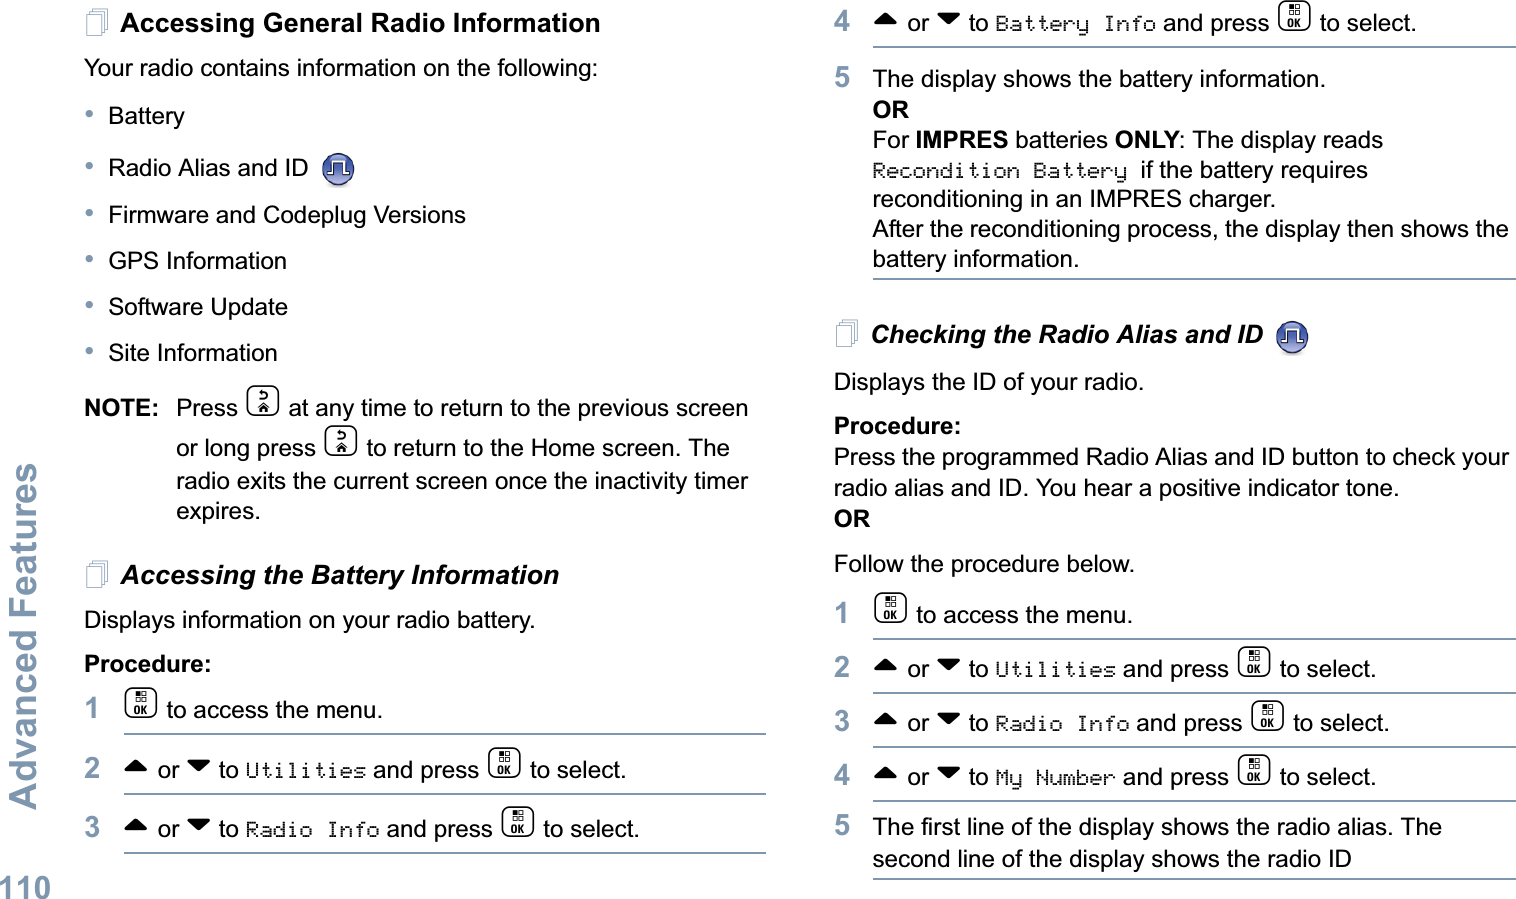 Advanced FeaturesEnglish110Accessing General Radio InformationYour radio contains information on the following:•Battery•Radio Alias and ID •Firmware and Codeplug Versions•GPS Information•Software Update•Site InformationNOTE: Press d at any time to return to the previous screen or long press d to return to the Home screen. The radio exits the current screen once the inactivity timer expires.Accessing the Battery InformationDisplays information on your radio battery.Procedure: 1c to access the menu.2^ or v to Utilities and press c to select.3^ or v to Radio Info and press c to select.4^ or v to Battery Info and press c to select. 5The display shows the battery information.ORFor IMPRES batteries ONLY: The display reads Recondition Battery if the battery requires reconditioning in an IMPRES charger. After the reconditioning process, the display then shows the battery information.Checking the Radio Alias and ID Displays the ID of your radio. Procedure: Press the programmed Radio Alias and ID button to check your radio alias and ID. You hear a positive indicator tone.ORFollow the procedure below.1c to access the menu.2^ or v to Utilities and press c to select.3^ or v to Radio Info and press c to select.4^ or v to My Number and press c to select.5The first line of the display shows the radio alias. The second line of the display shows the radio ID